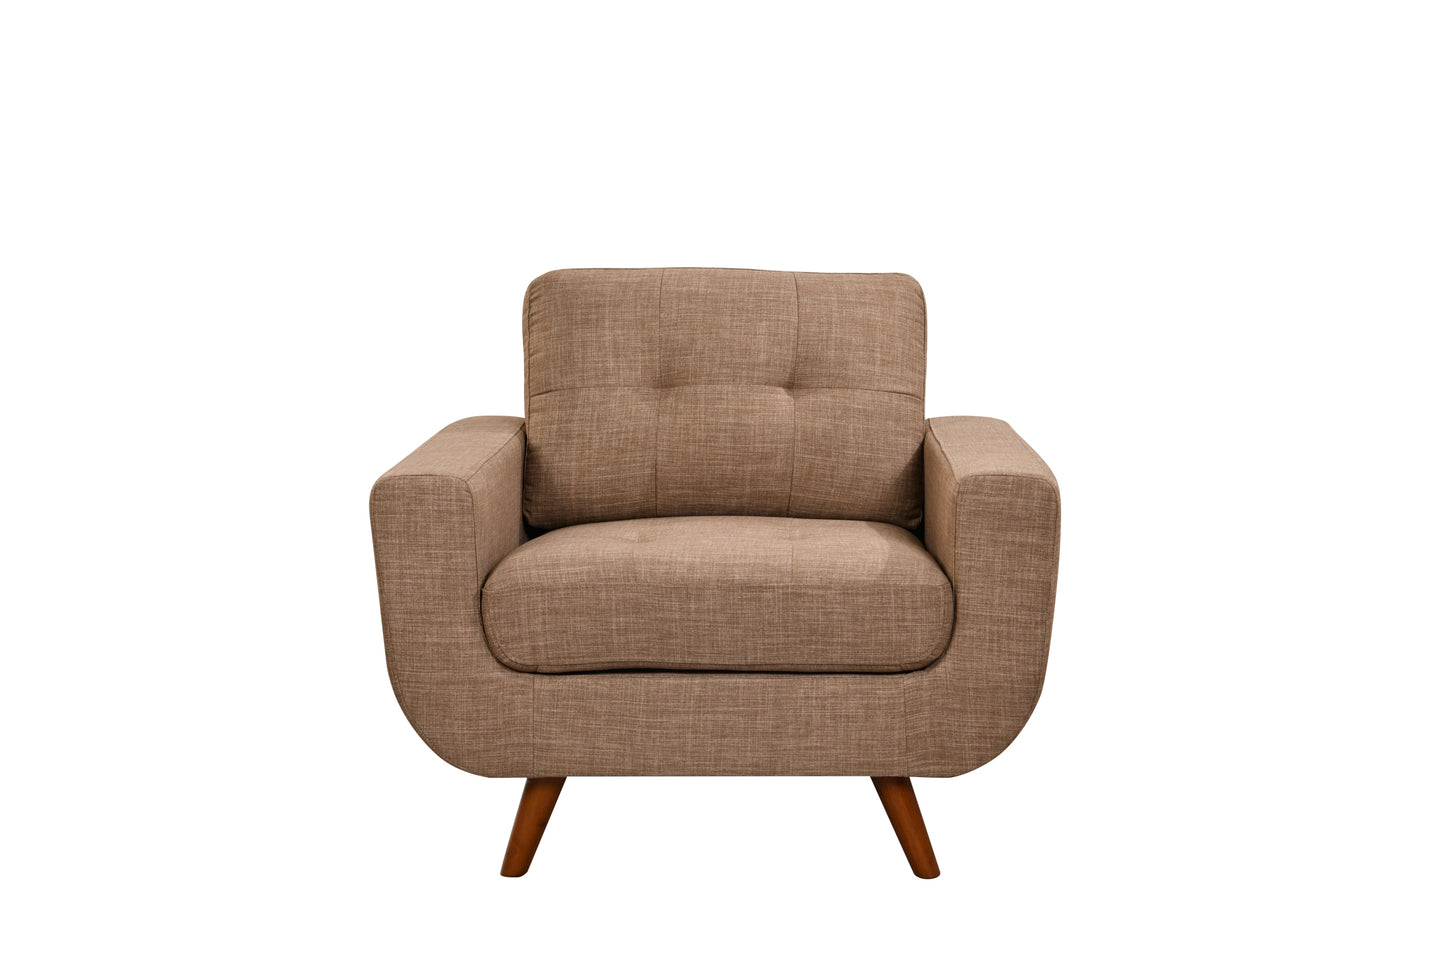 41''Linen Fabric Accent Chair, Mid Century Modern Armchair for Living Room,Bedroom Button Tufted Upholstered Comfy Reading Accent Sofa Chairs,Light Brown